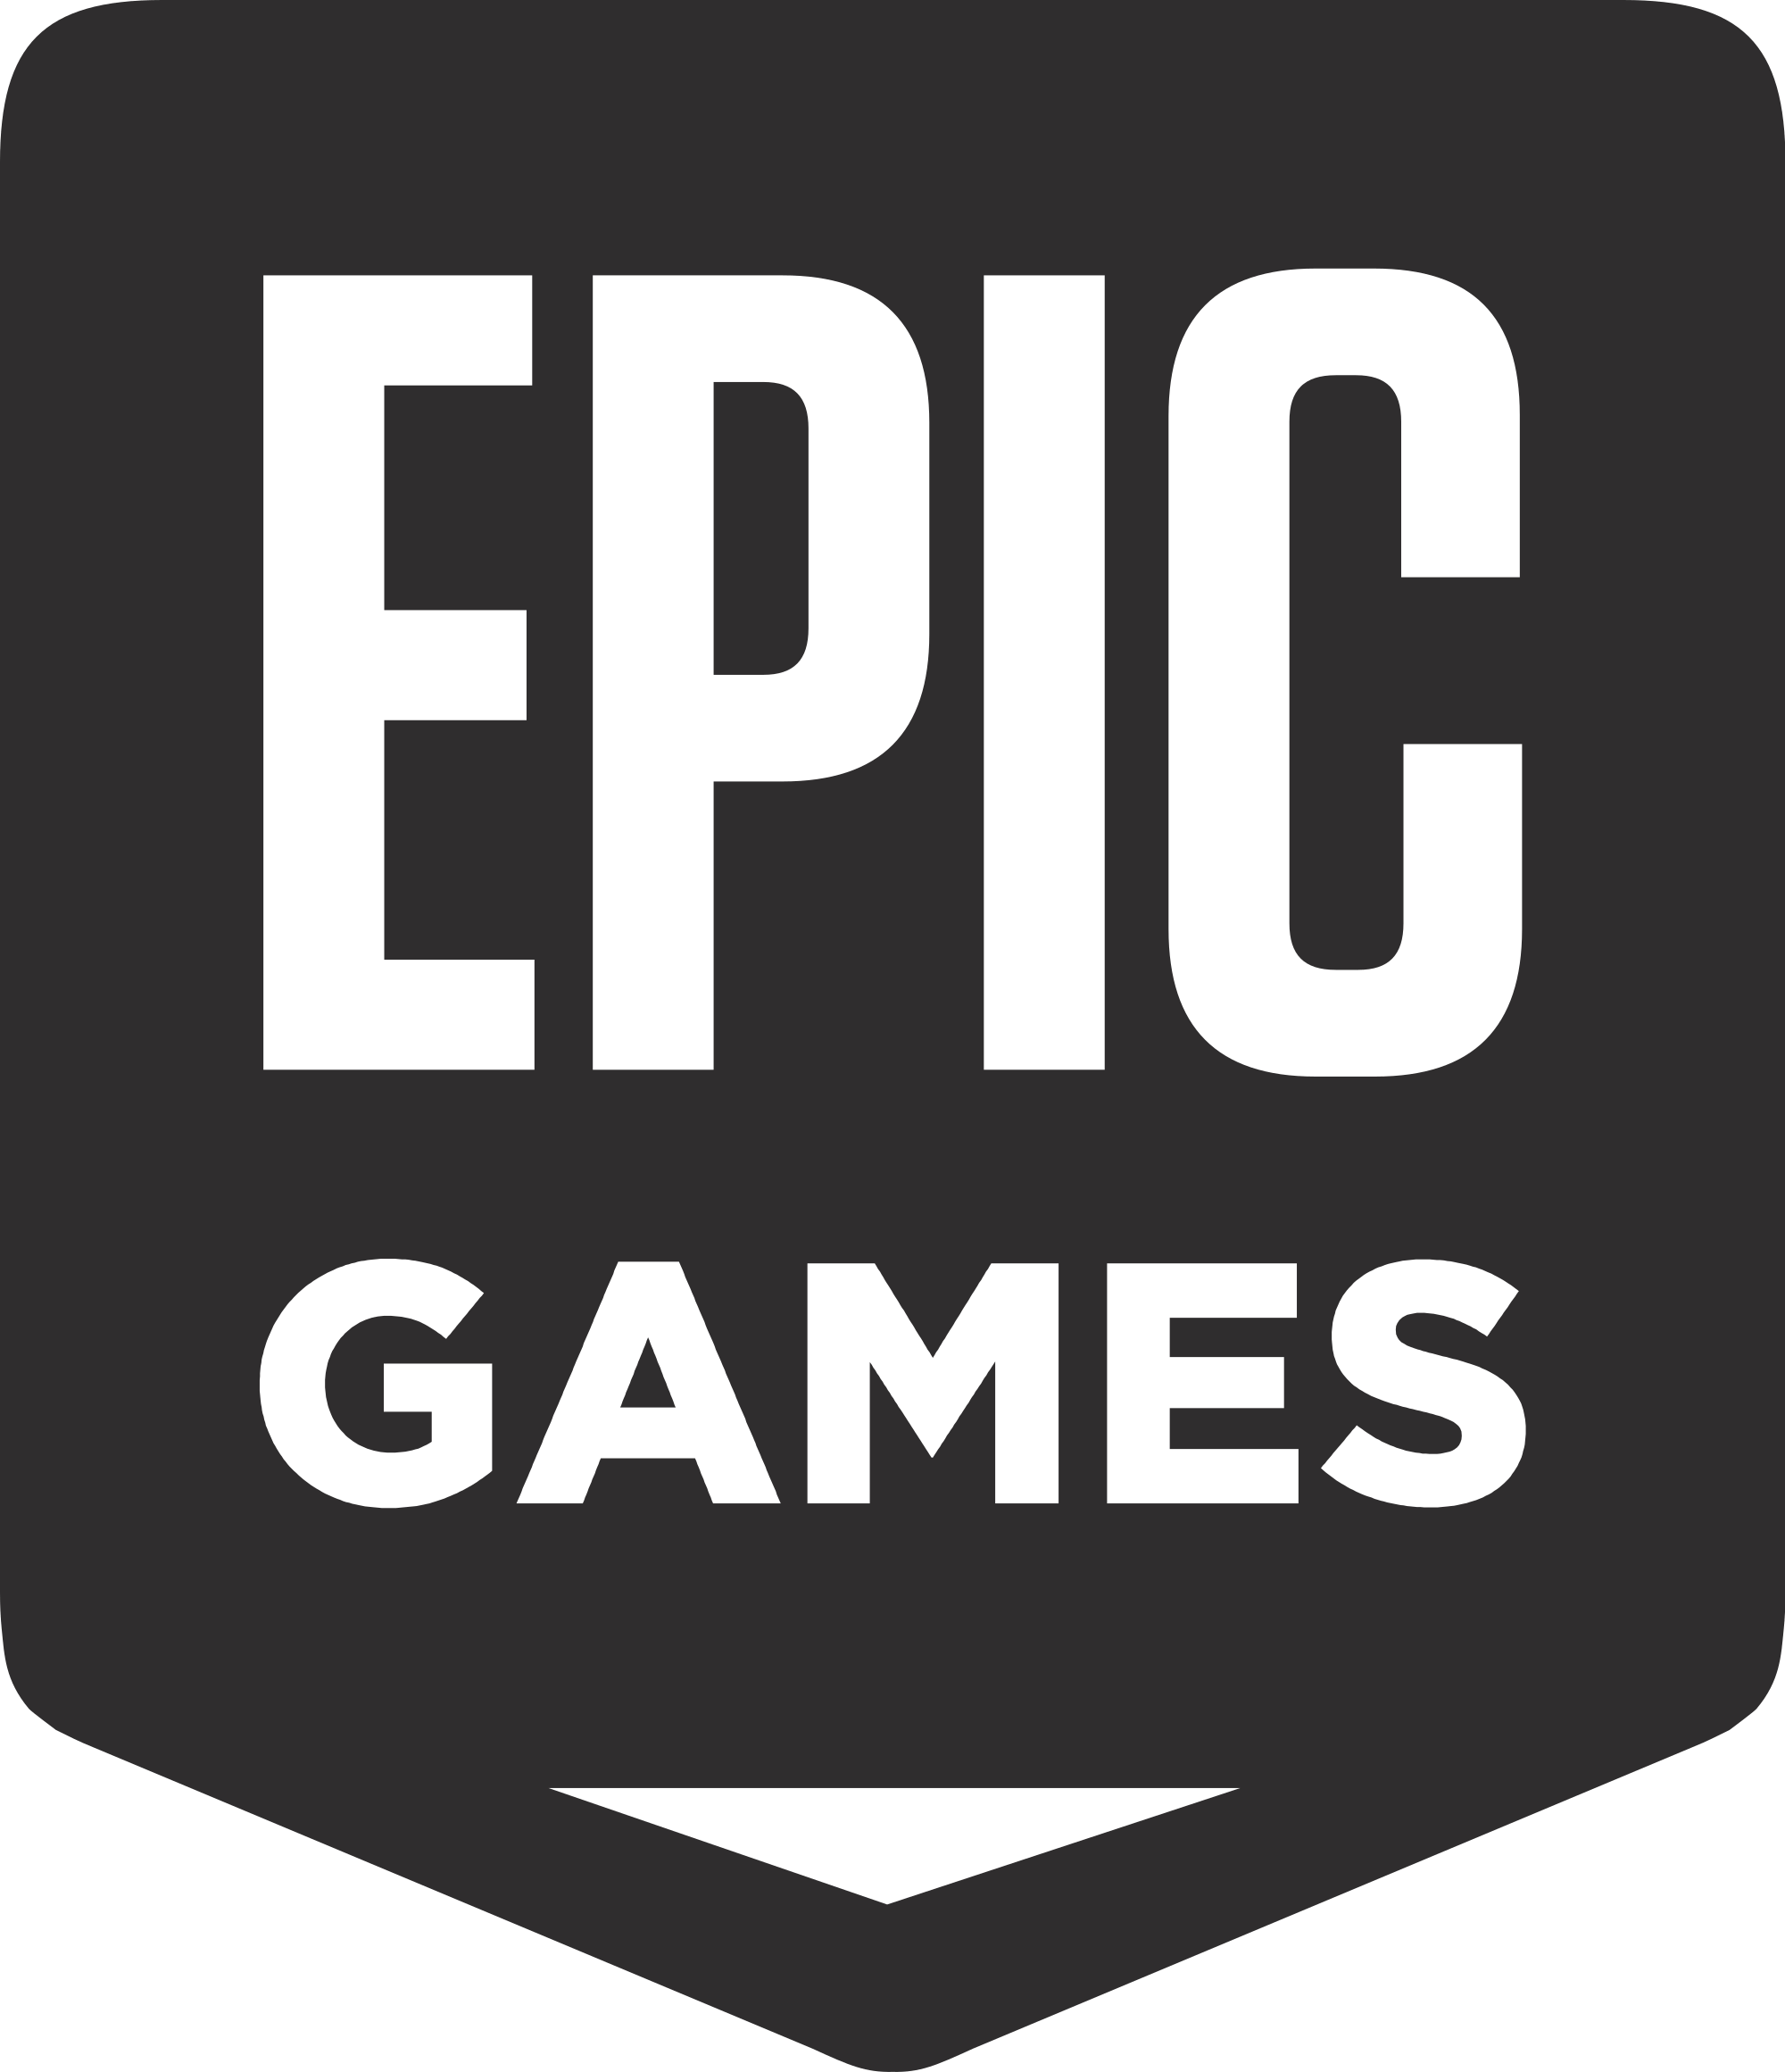 Games Logo - File:Epic Games logo.svg - Wikimedia Commons